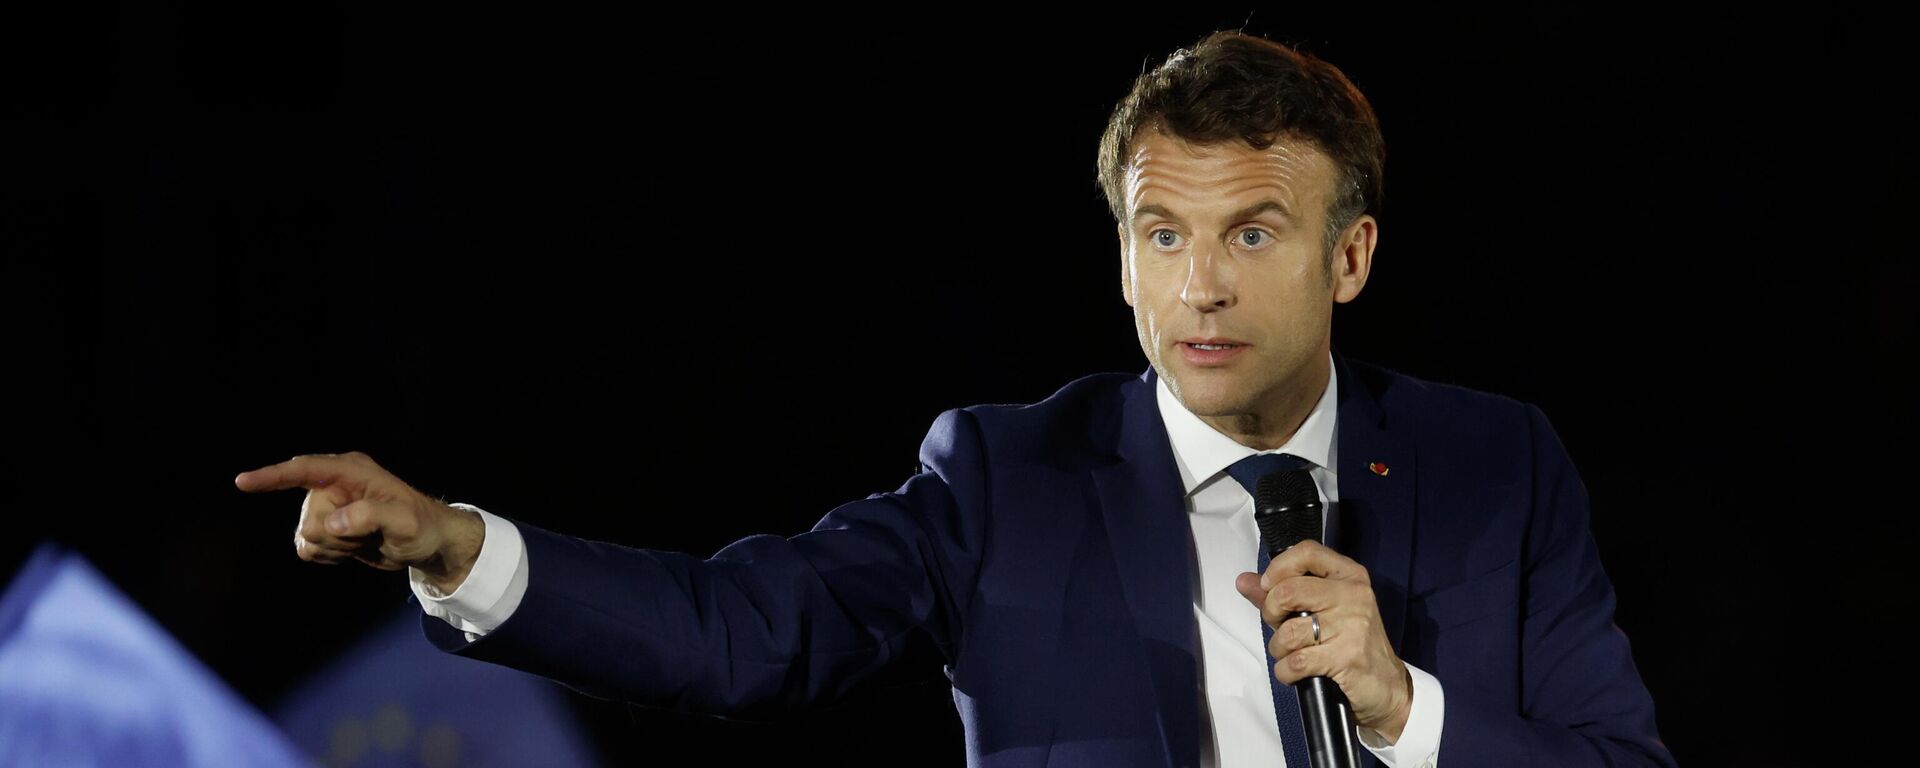 Current French President and centrist presidential candidate for reelection Emmanuel Macron delivers a speech during a campaign rally in Strasbourg, eastern France, Tuesday, April 12, 2022 . Macron, with strong pro-European views, and far-right candidate Marine Le Pen, an anti-immigration nationalist, are facing each other in the presidential runoff on April 24. (AP Photo/Jean-Francois Badias) - Sputnik International, 1920, 04.01.2023